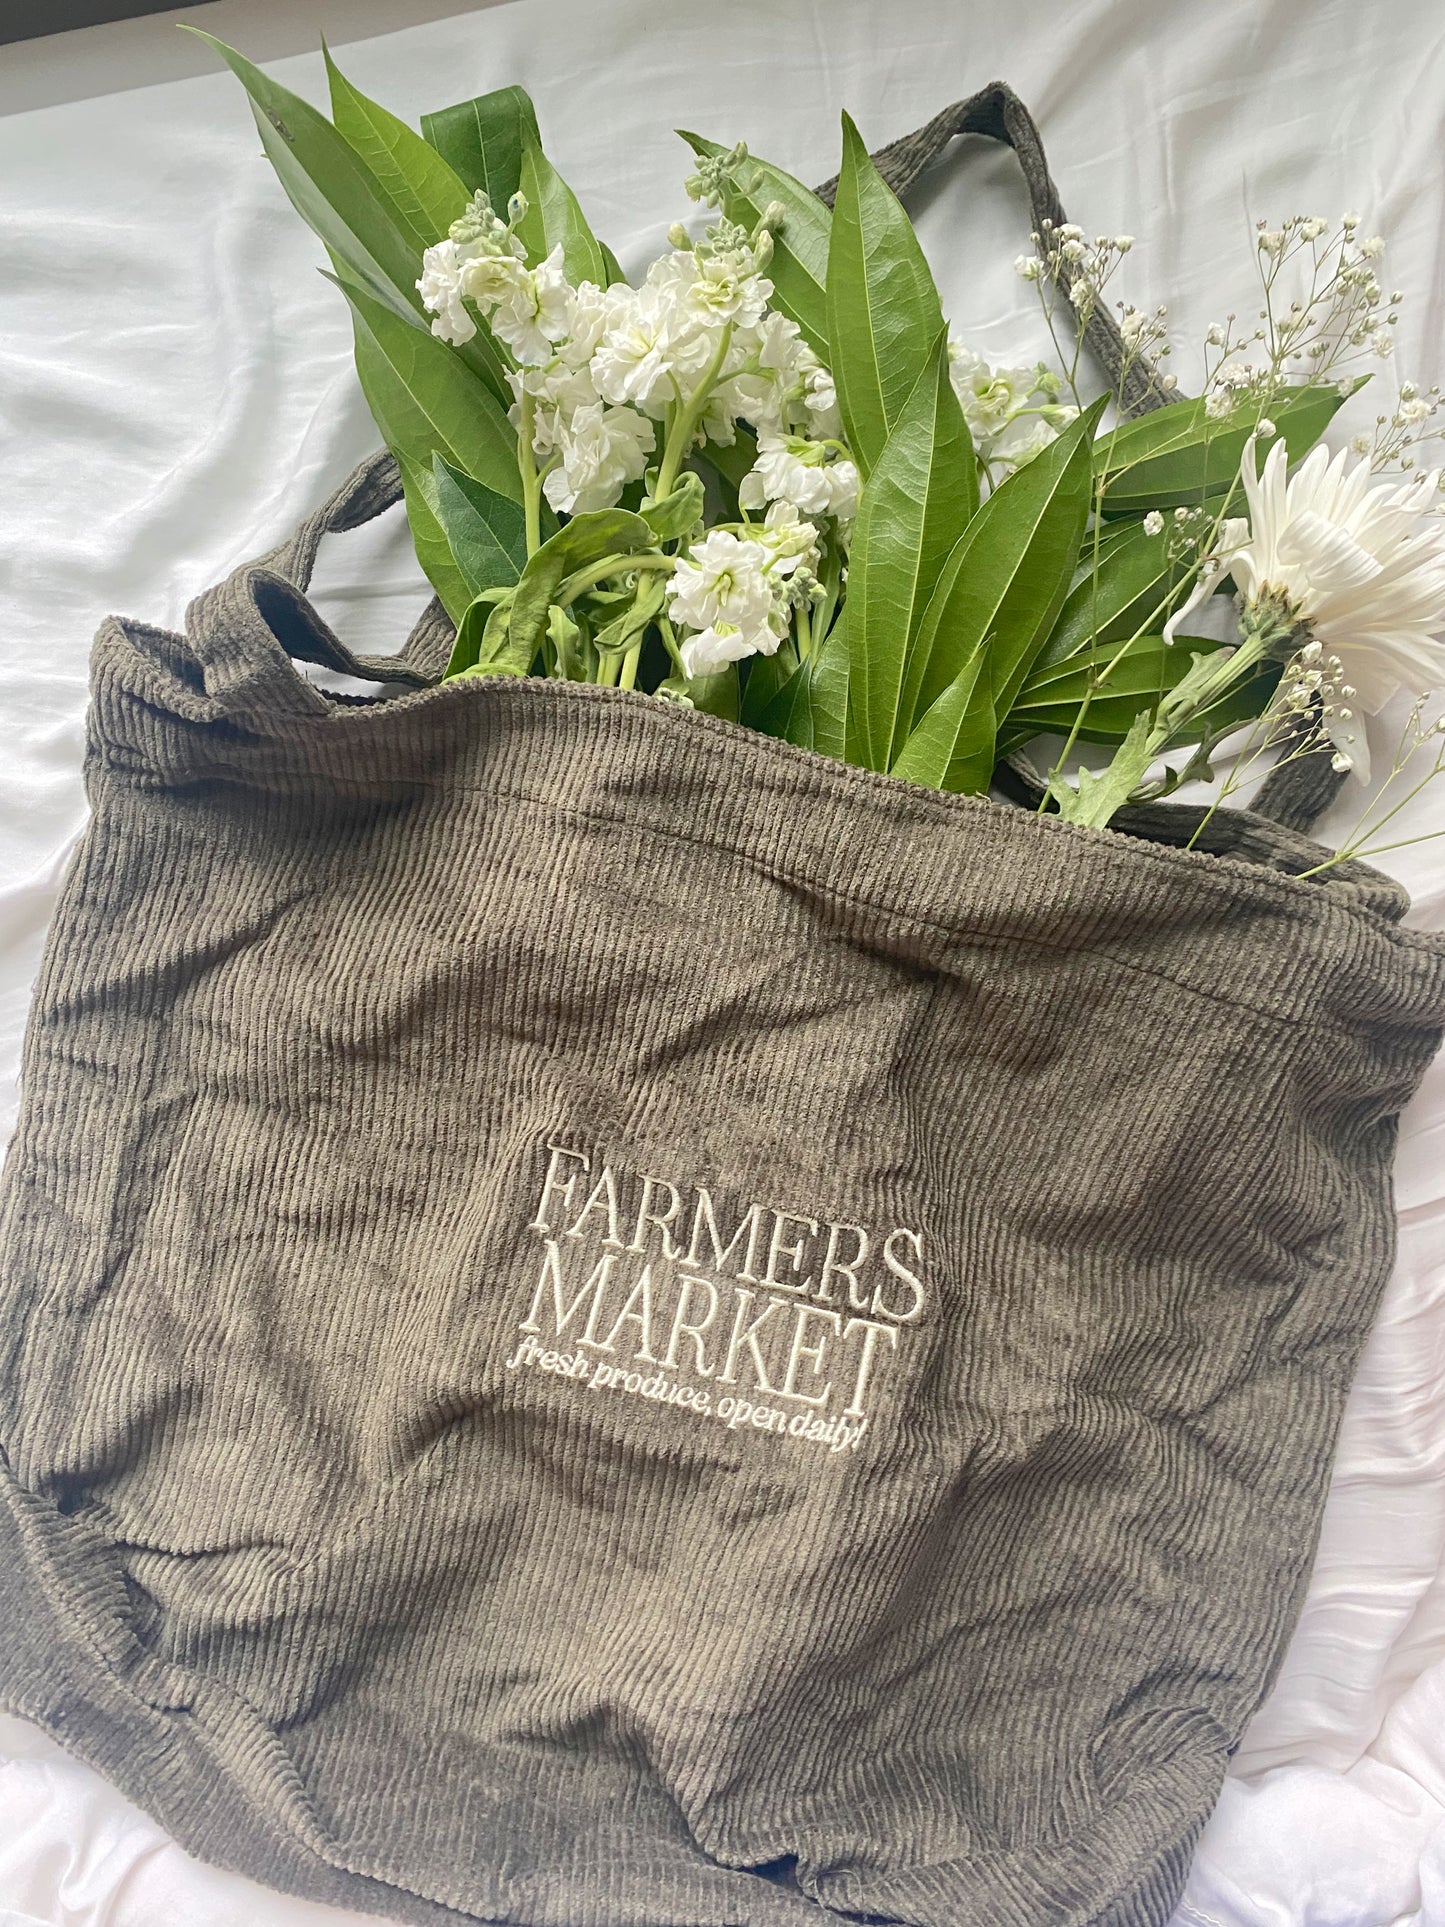 Farmers Market Embroidered Corduroy Tote Bag